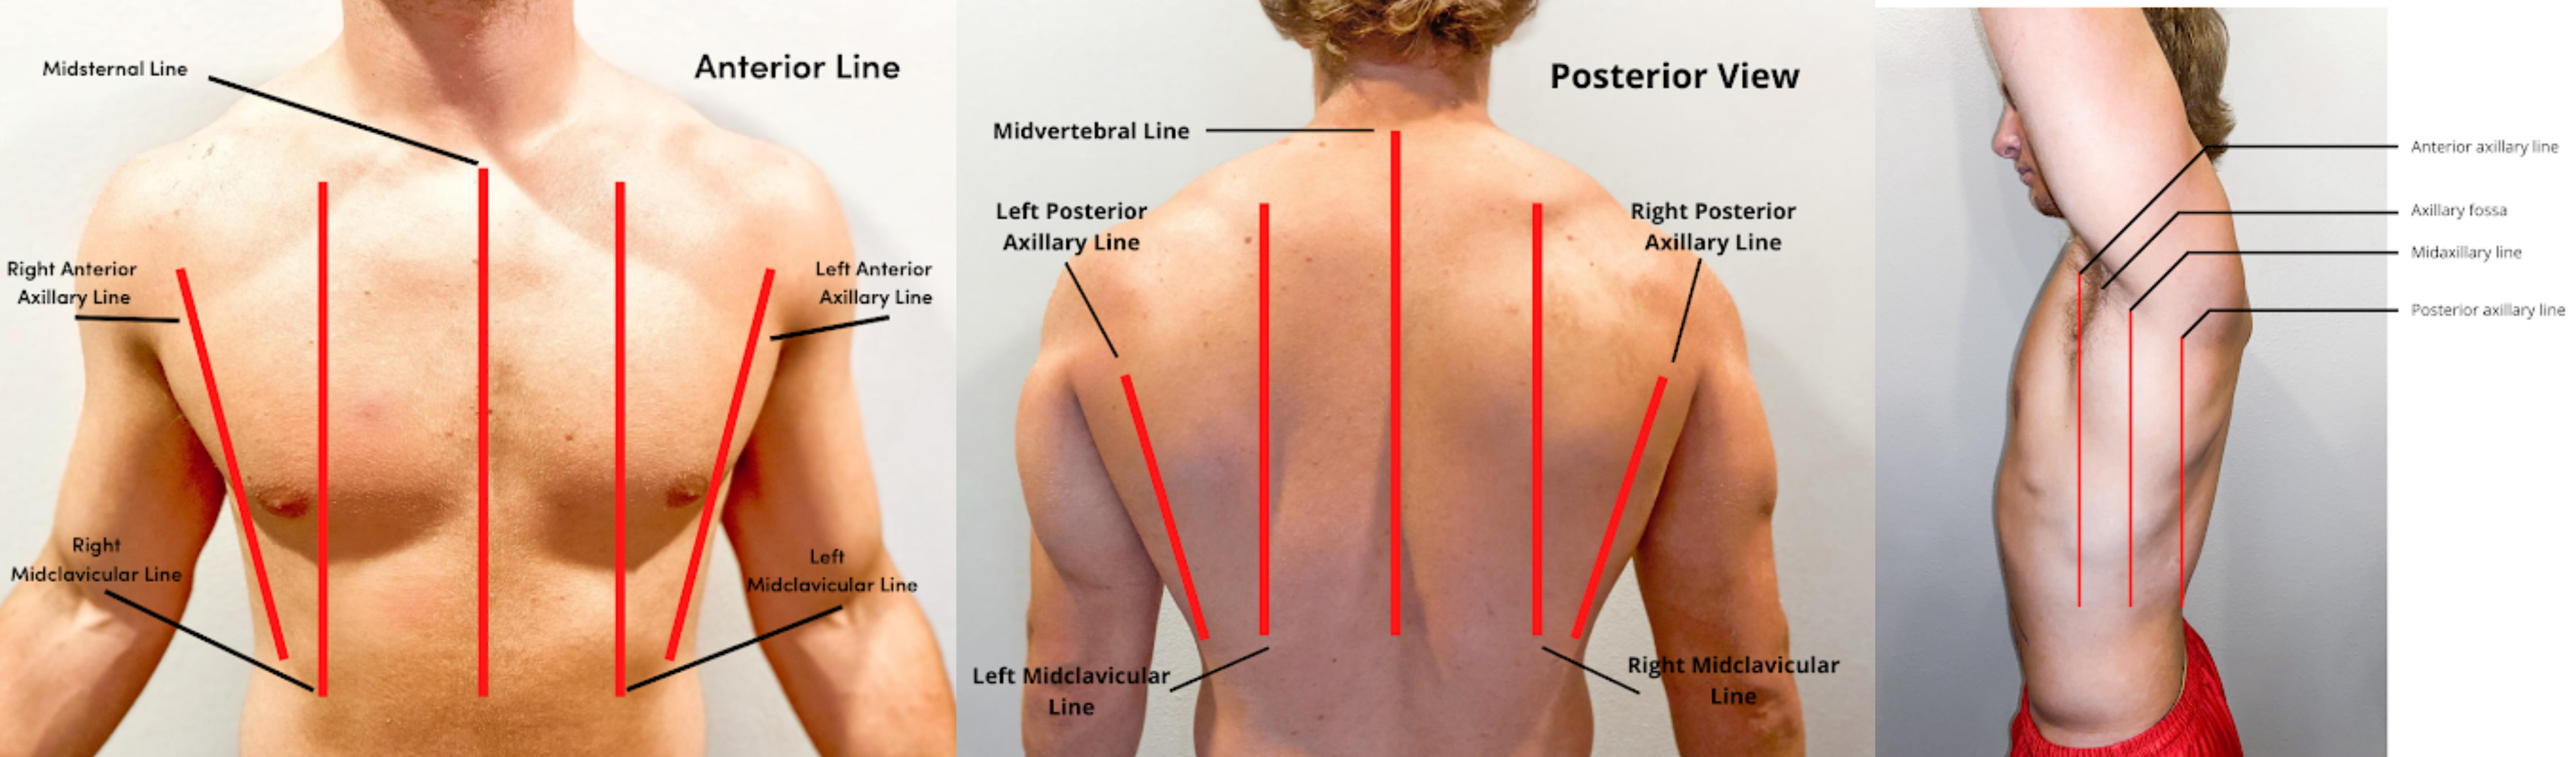 A practical treatise on medical diagnosis for students and physicians . The  flat or phthisical chest: short anteroposterior, long transverse diameter.  (Gee.) slanting, making the epigastric angle particularly sharp. The  shouldersfall;